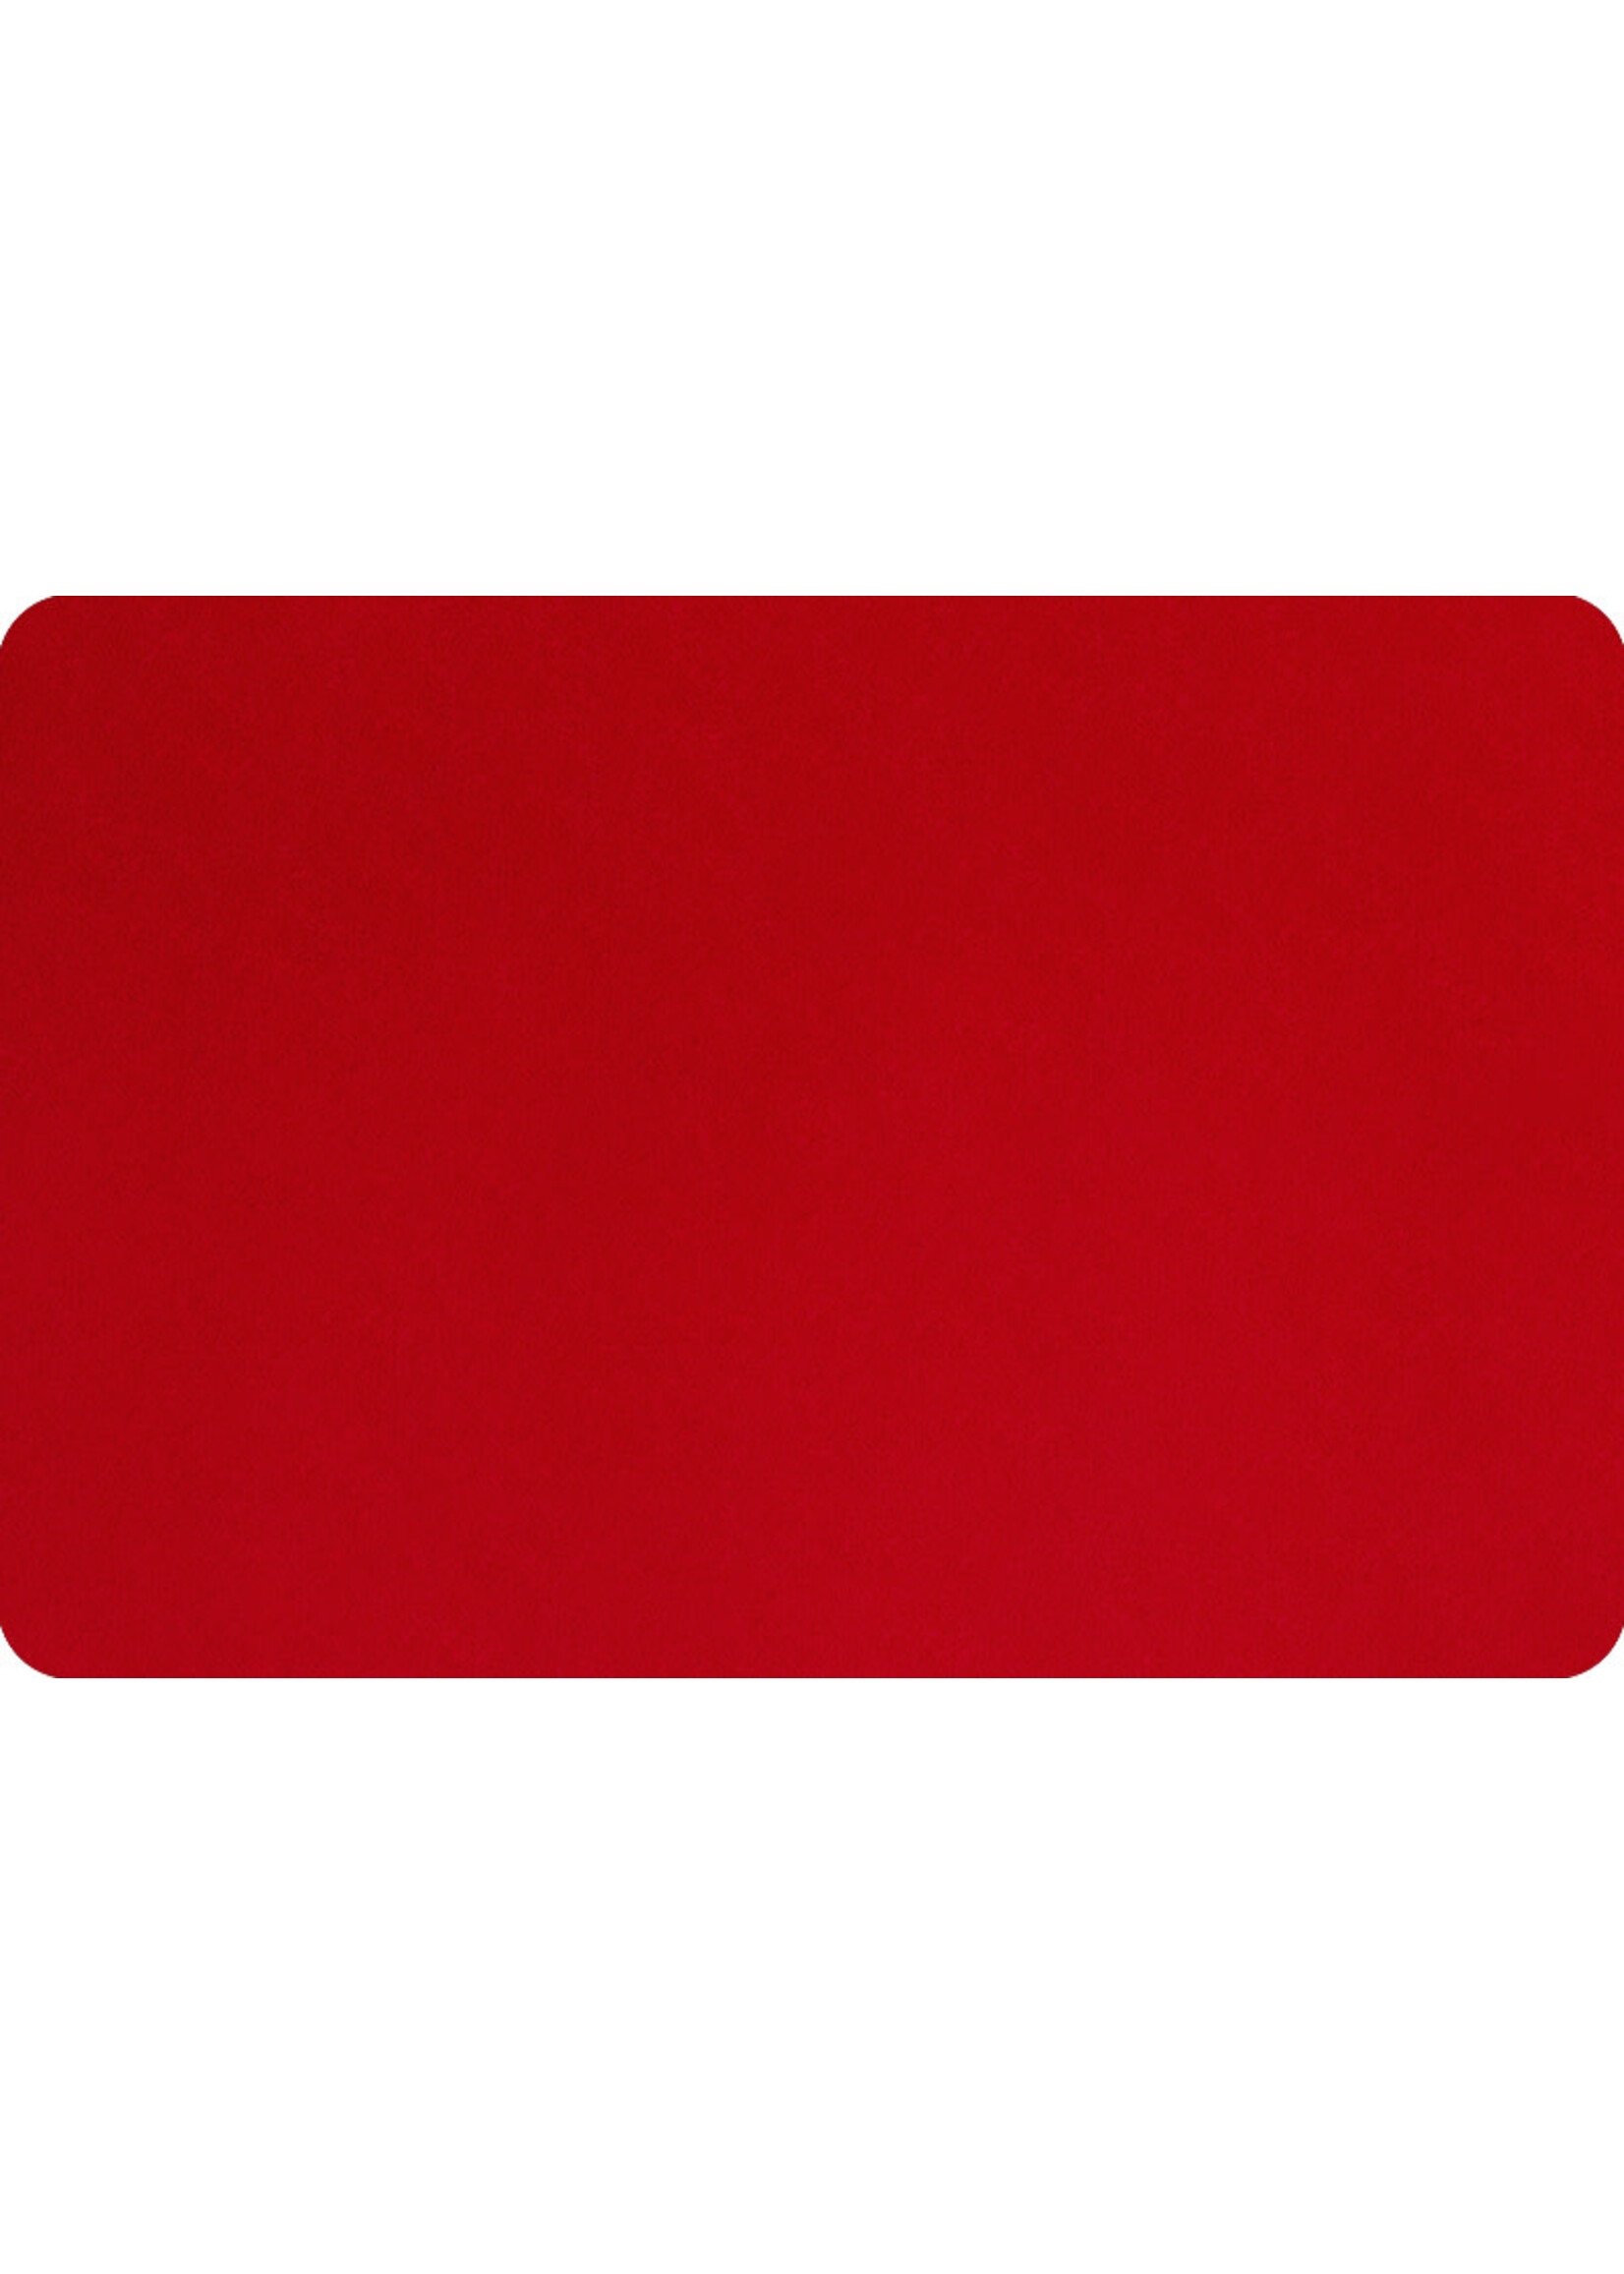 Shannon Fabrics Minky, Scarlet Extra Wide Solid Cuddle3 90" (by the inch)